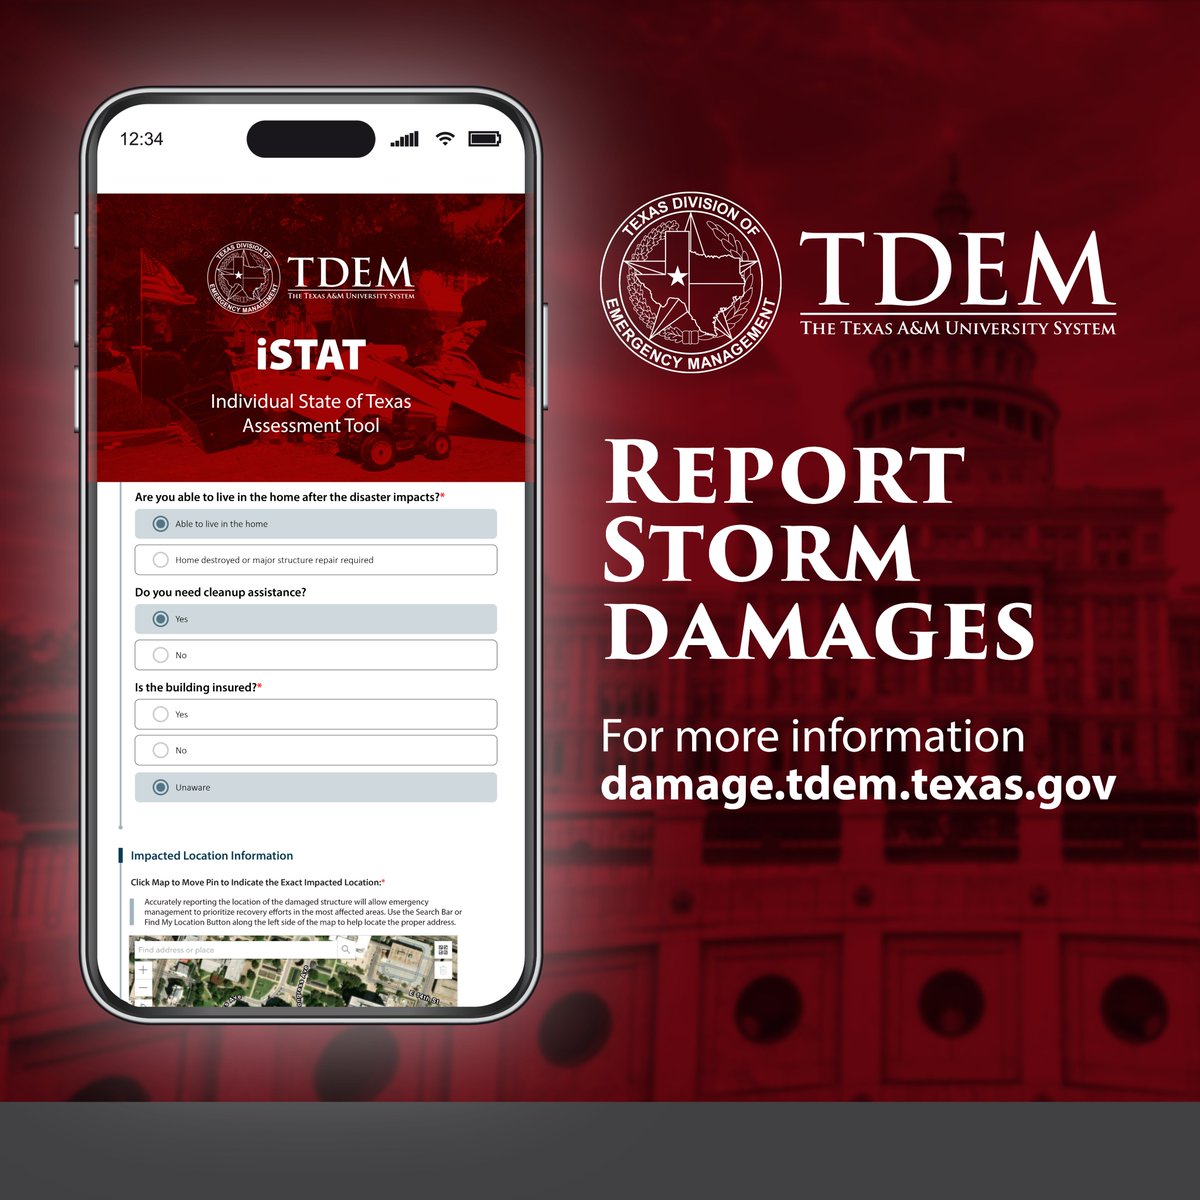 If you have suffered property damage from severe storms, fill out TDEM’s online damage survey.⚡️ This information helps officials identify impacted areas and connect Texans with recovery resources. 📝Report Damage Here: damage.tdem.texas.gov #txwx